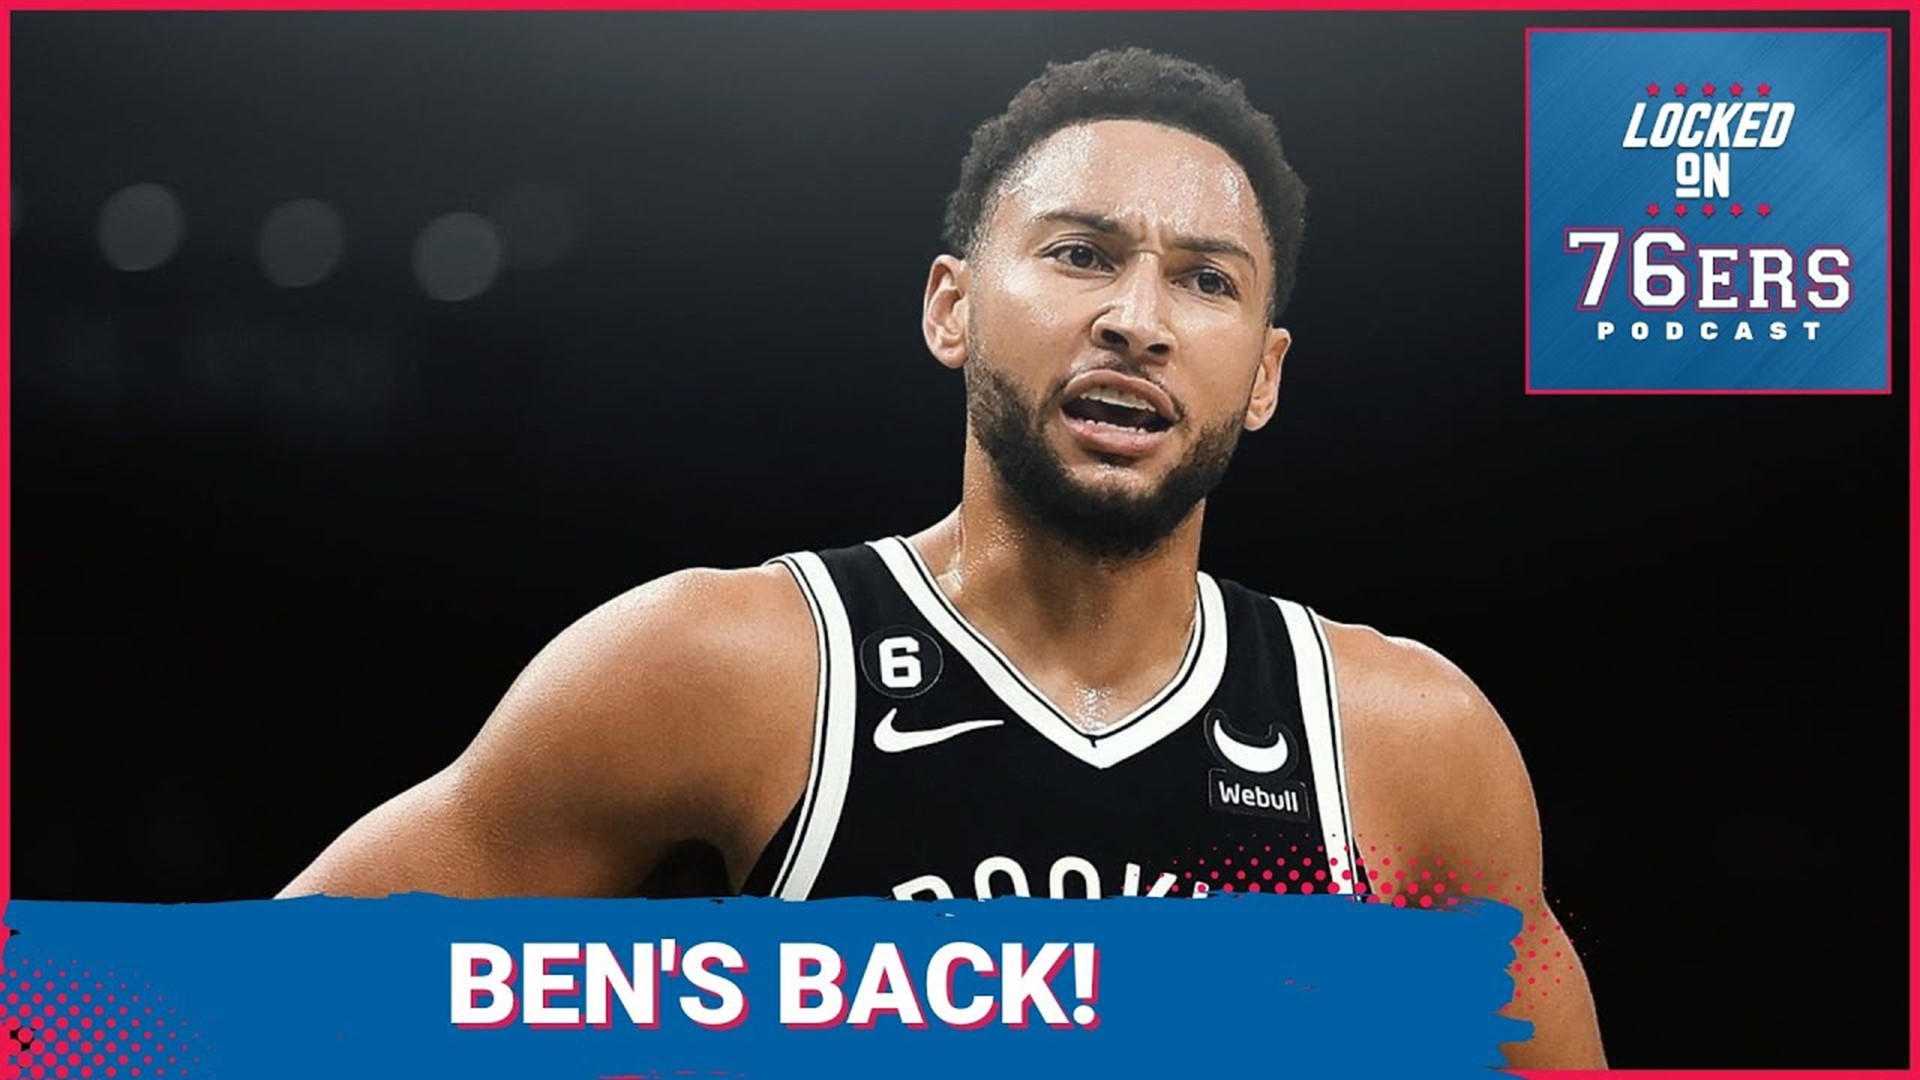 Devon Givens and Keith Pompey preview Ben Simmons' first game back to play against the 76ers since being traded to the Brooklyn Nets.